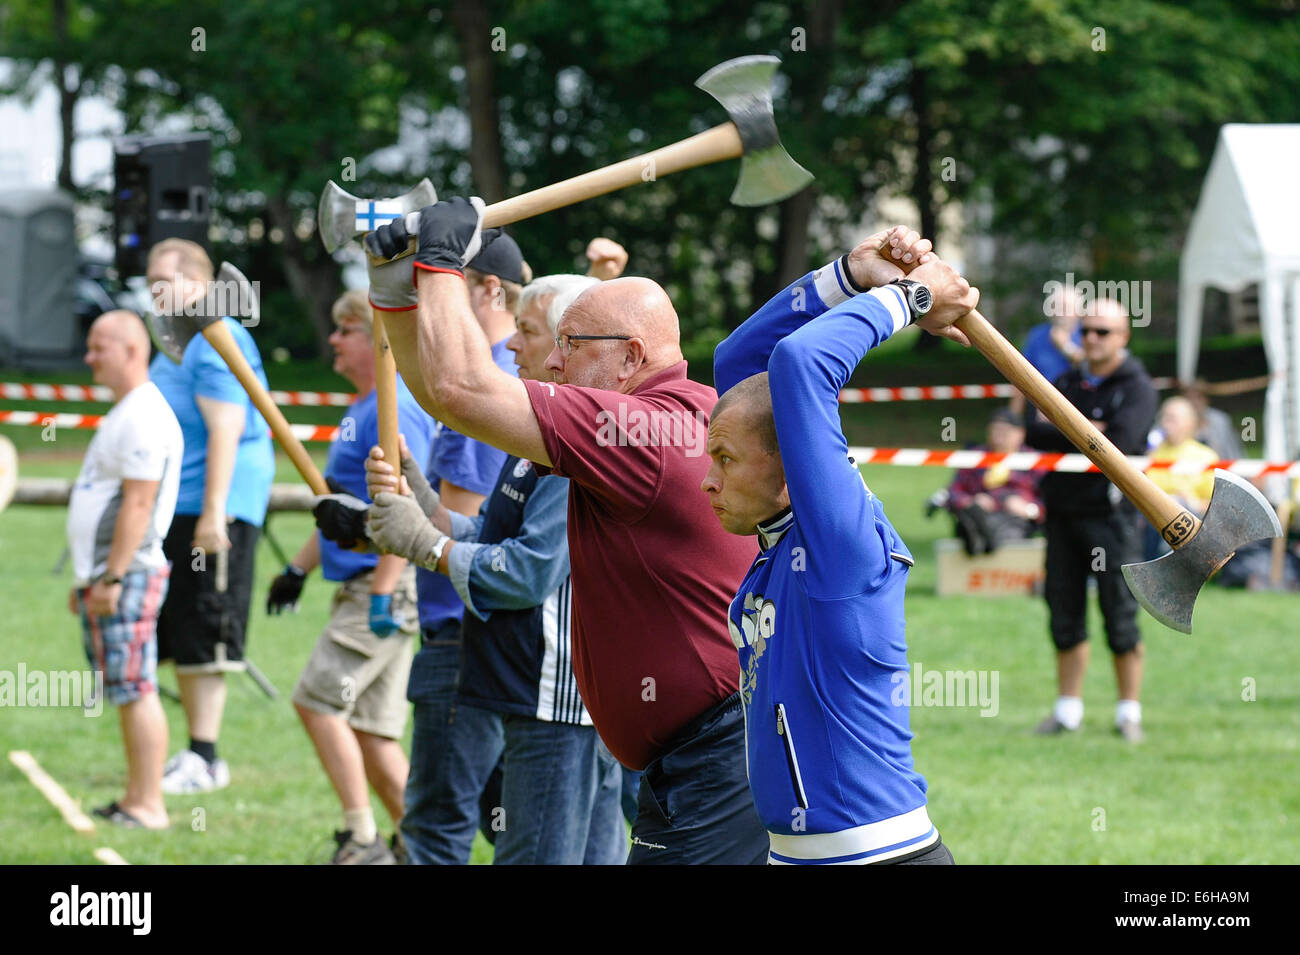 Maetaguse, Estonia. 23rd Aug, 2014. Players compete in the Nordic axe throwing championship in Maetaguse, Estonia, on Aug. 23, 2014. More than 100 best axe throwers from Denmark, Sweden, Finland and Estonia compete in the Nordic axe throwing championship, which lasts from 22 to 23 of August. © Sergei Stepanov/Xinhua/Alamy Live News Stock Photo